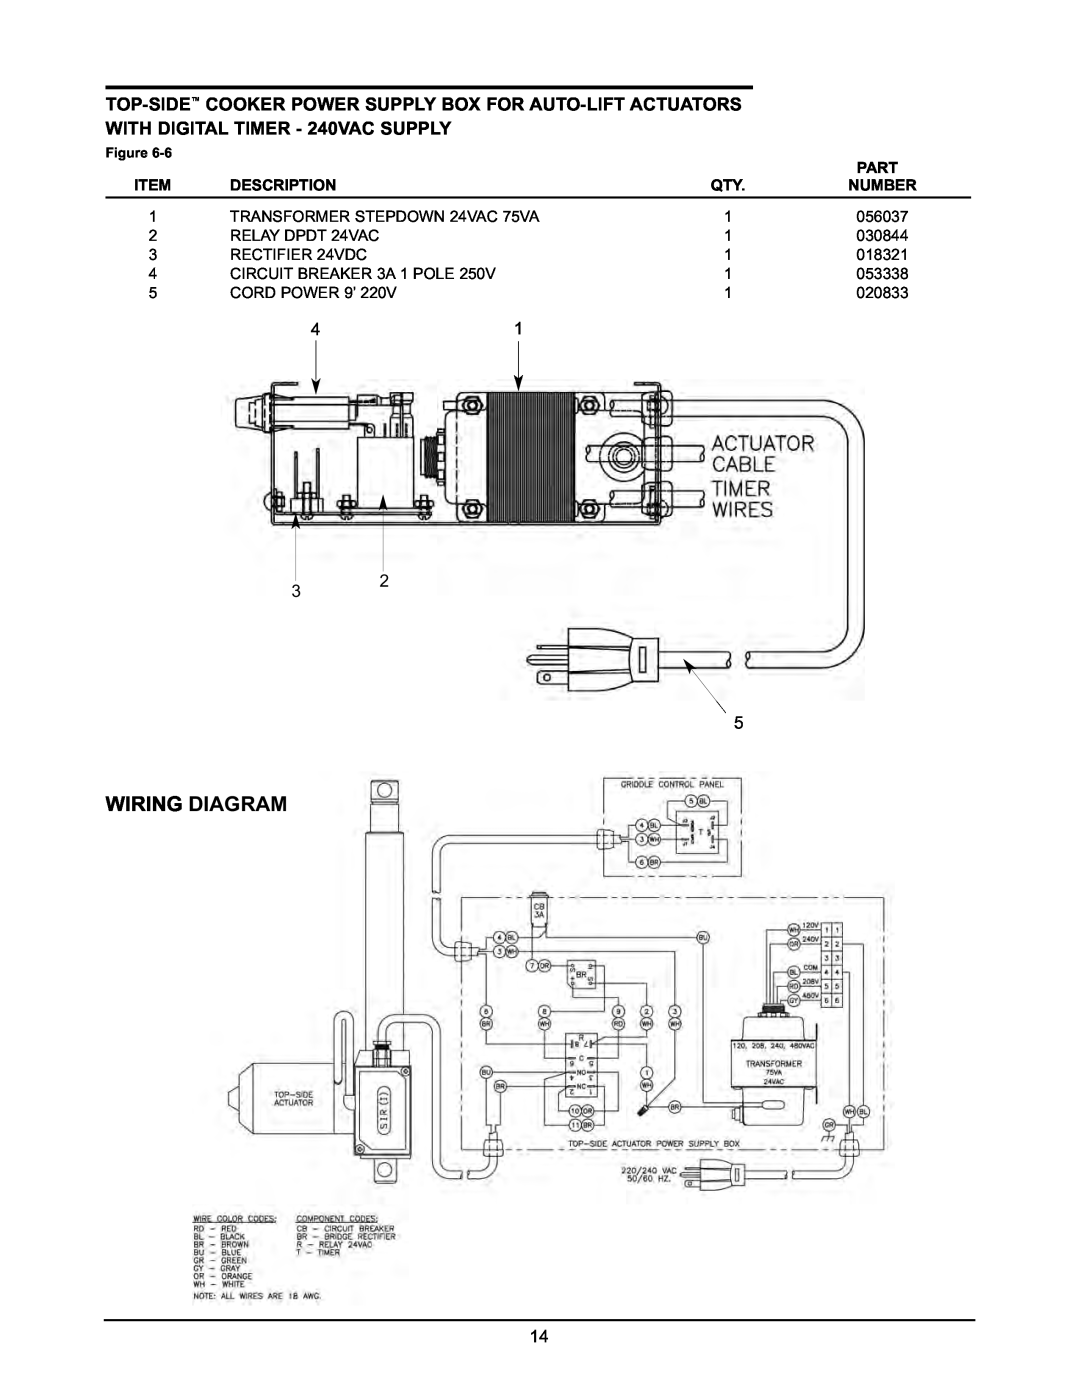 Keating Of Chicago 2005 user manual Wiring Diagram, WITH DIGITAL TIMER - 240VAC SUPPLY 